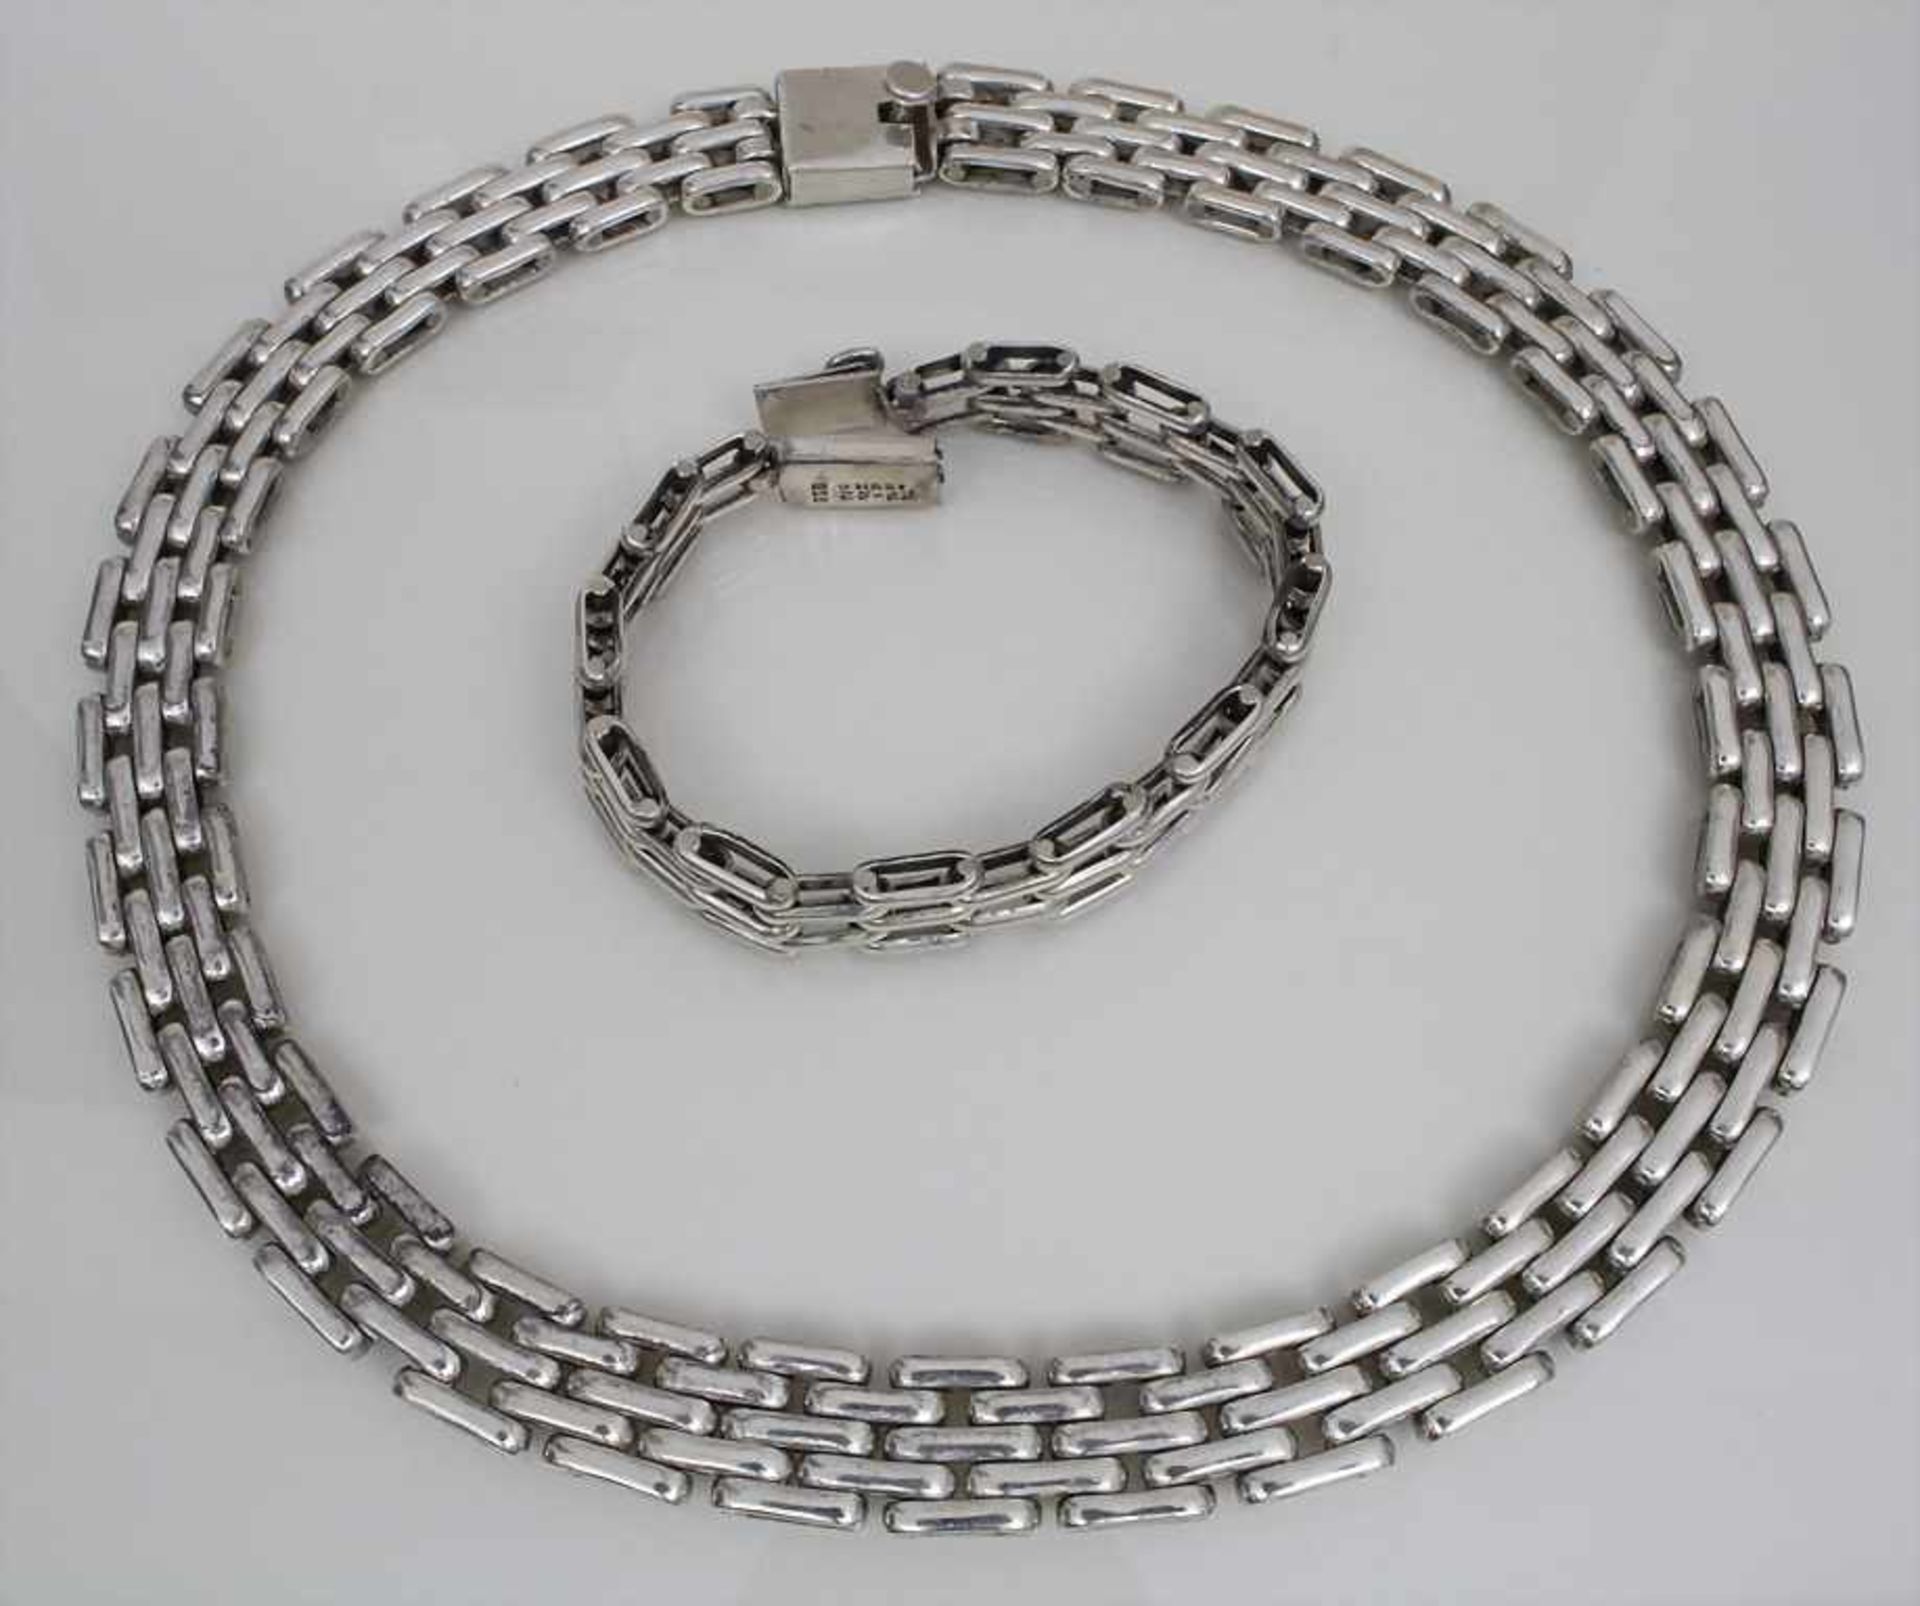 Sterlingsilber Collier mit Armband / A sterling silver necklace with bracelet Material: Silber 925